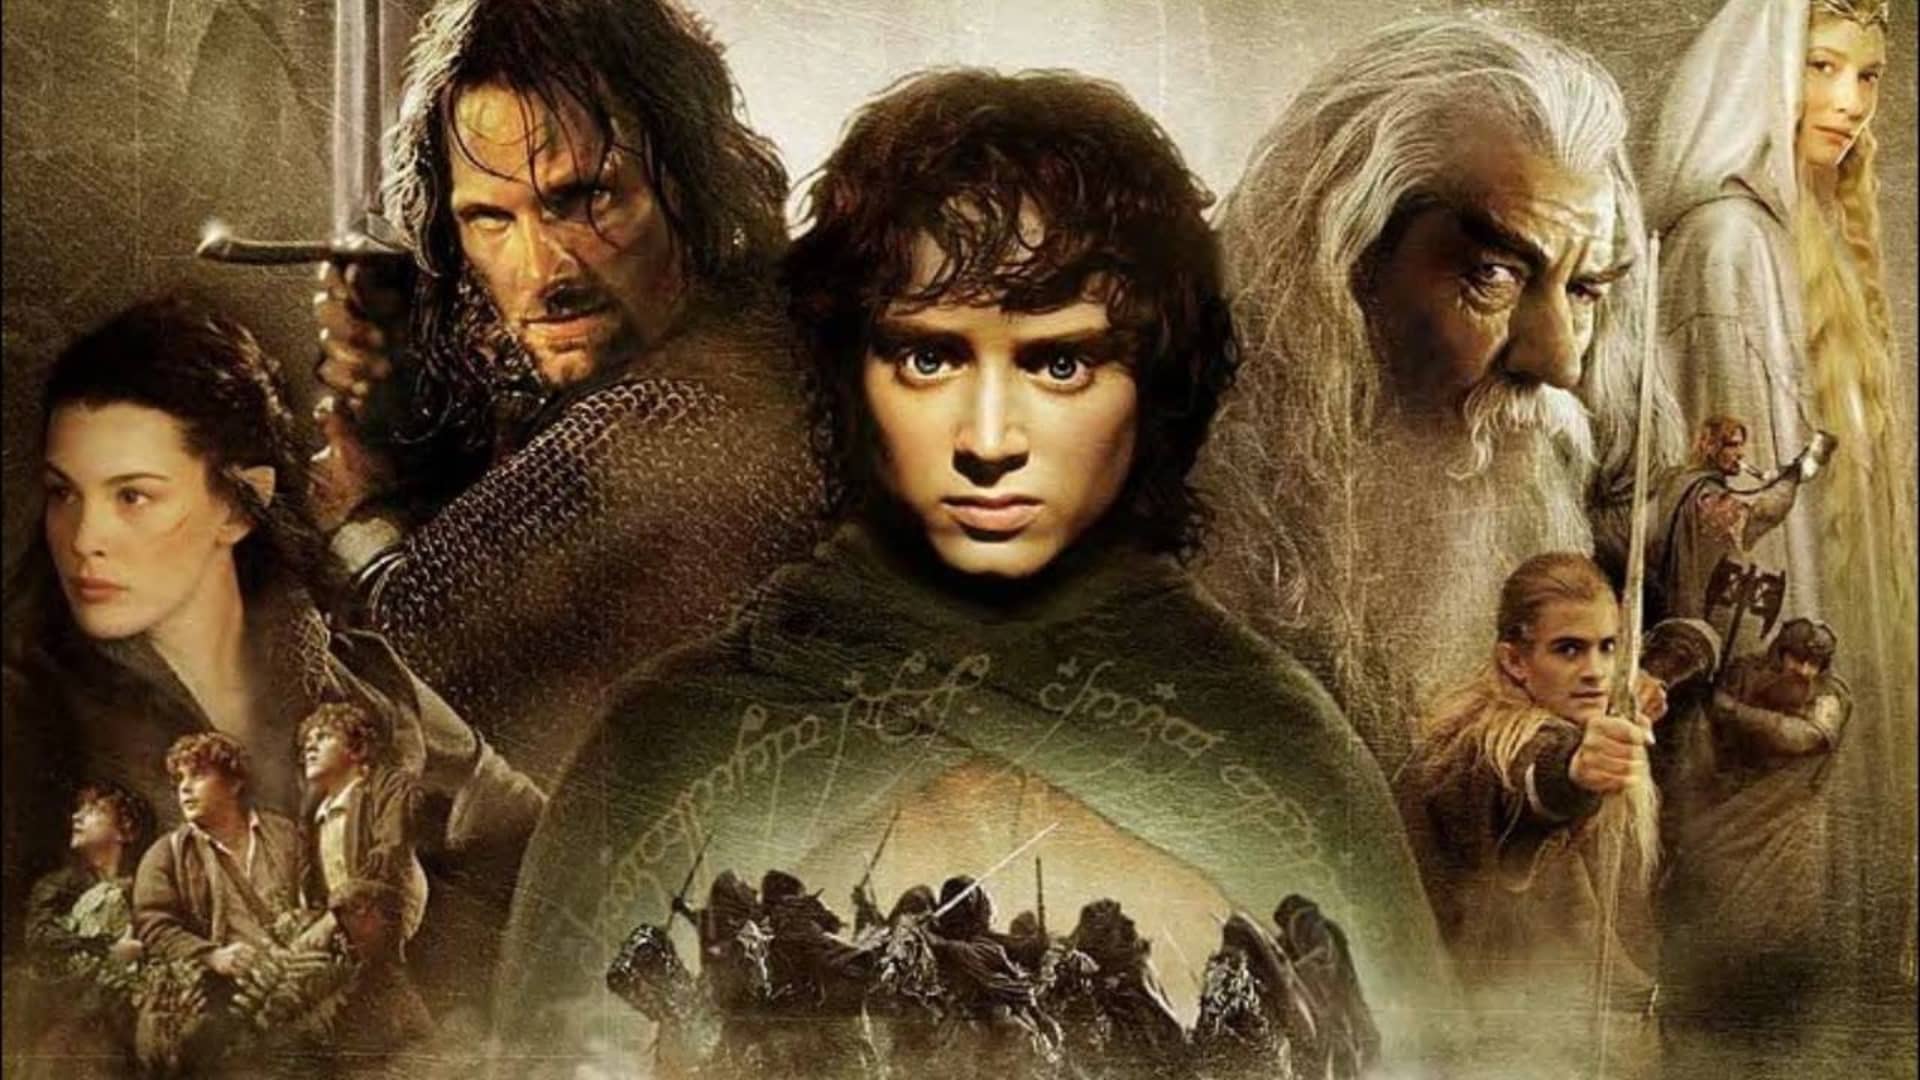 s 'Lord of the Rings' Saw Only 37% of Viewers Finish Series